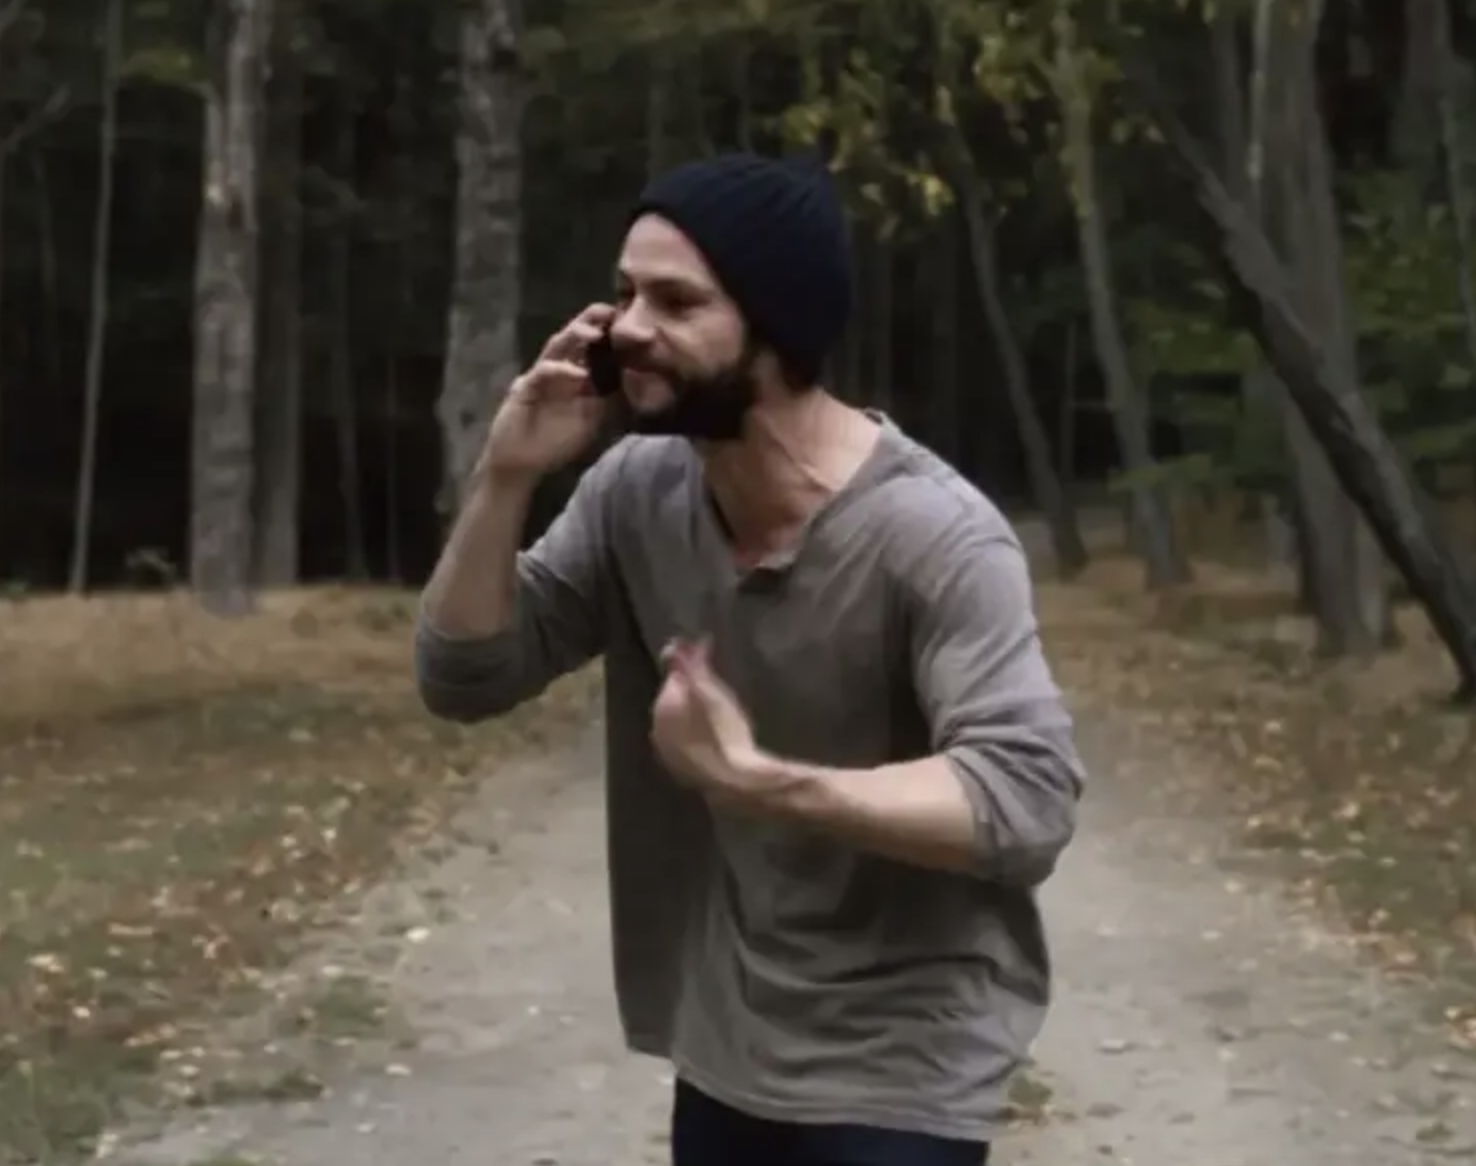 Dylan speaking on the phone while walking on a trail in the woods